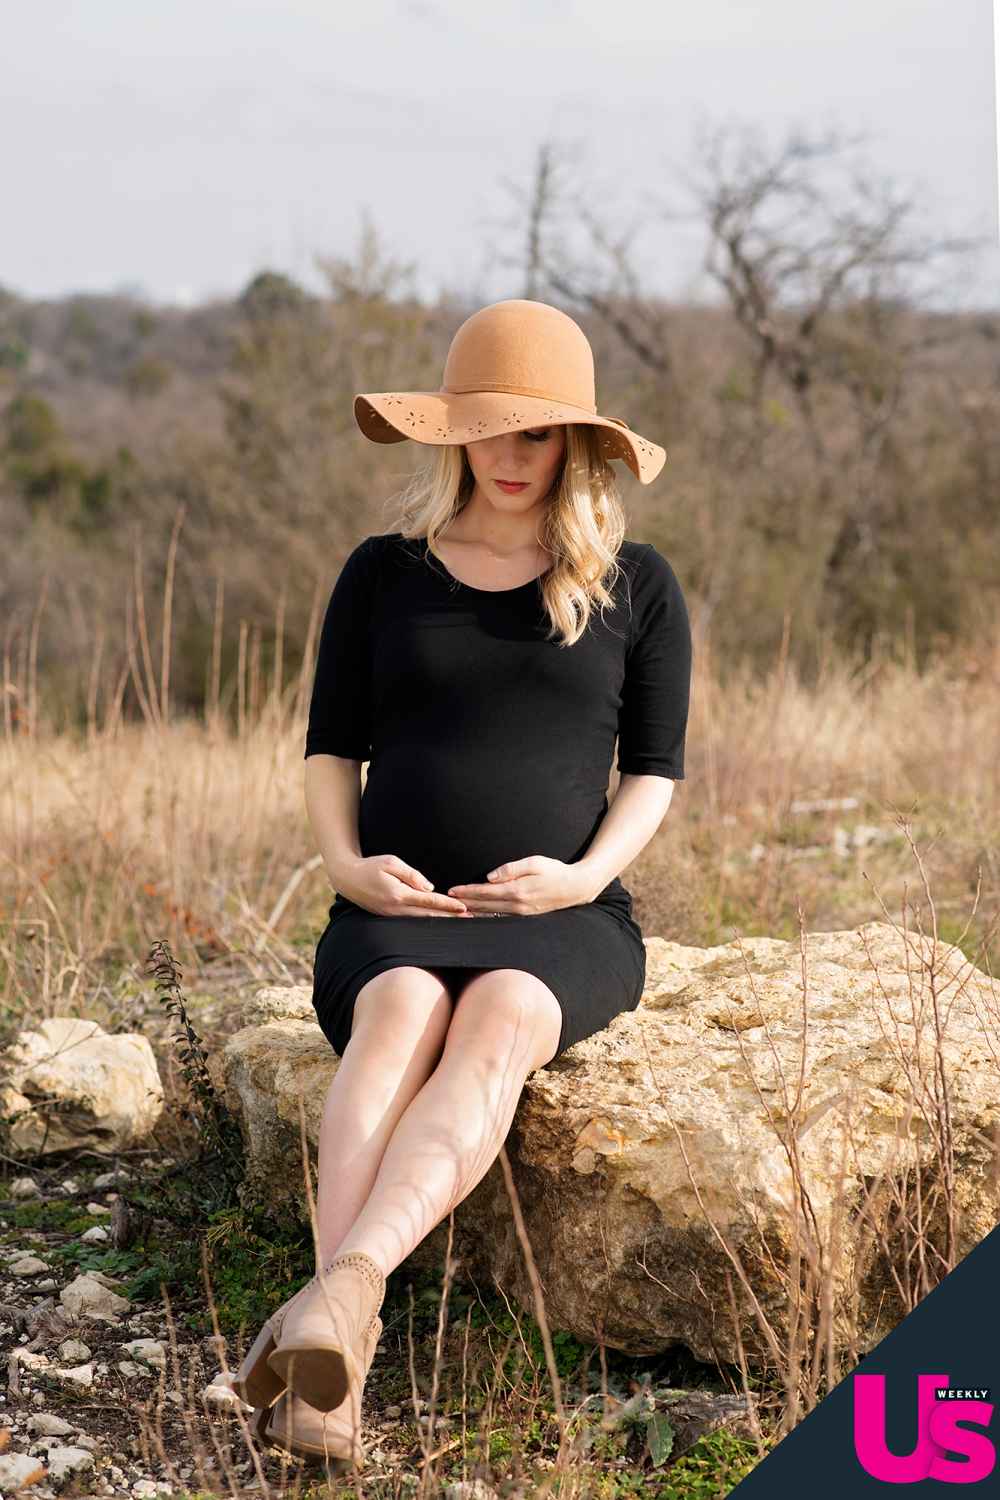 Married at First Sight’s Danielle Bergman – three exclusive photos from her maternity shoot